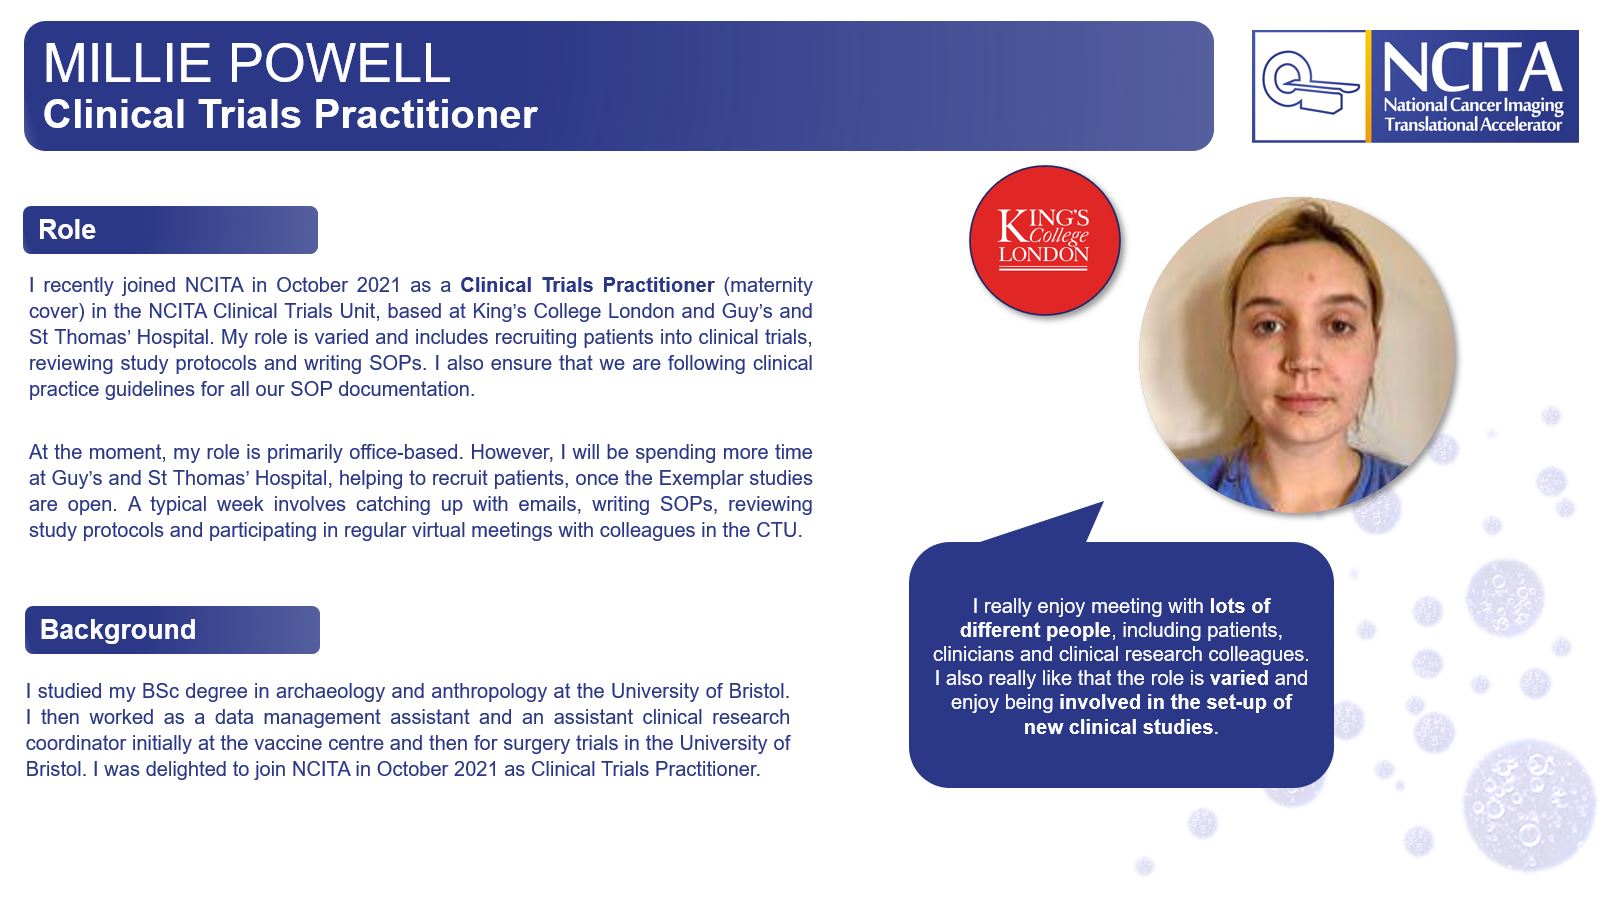 Millie Powell - NCITA Clinical Trials Practitioner